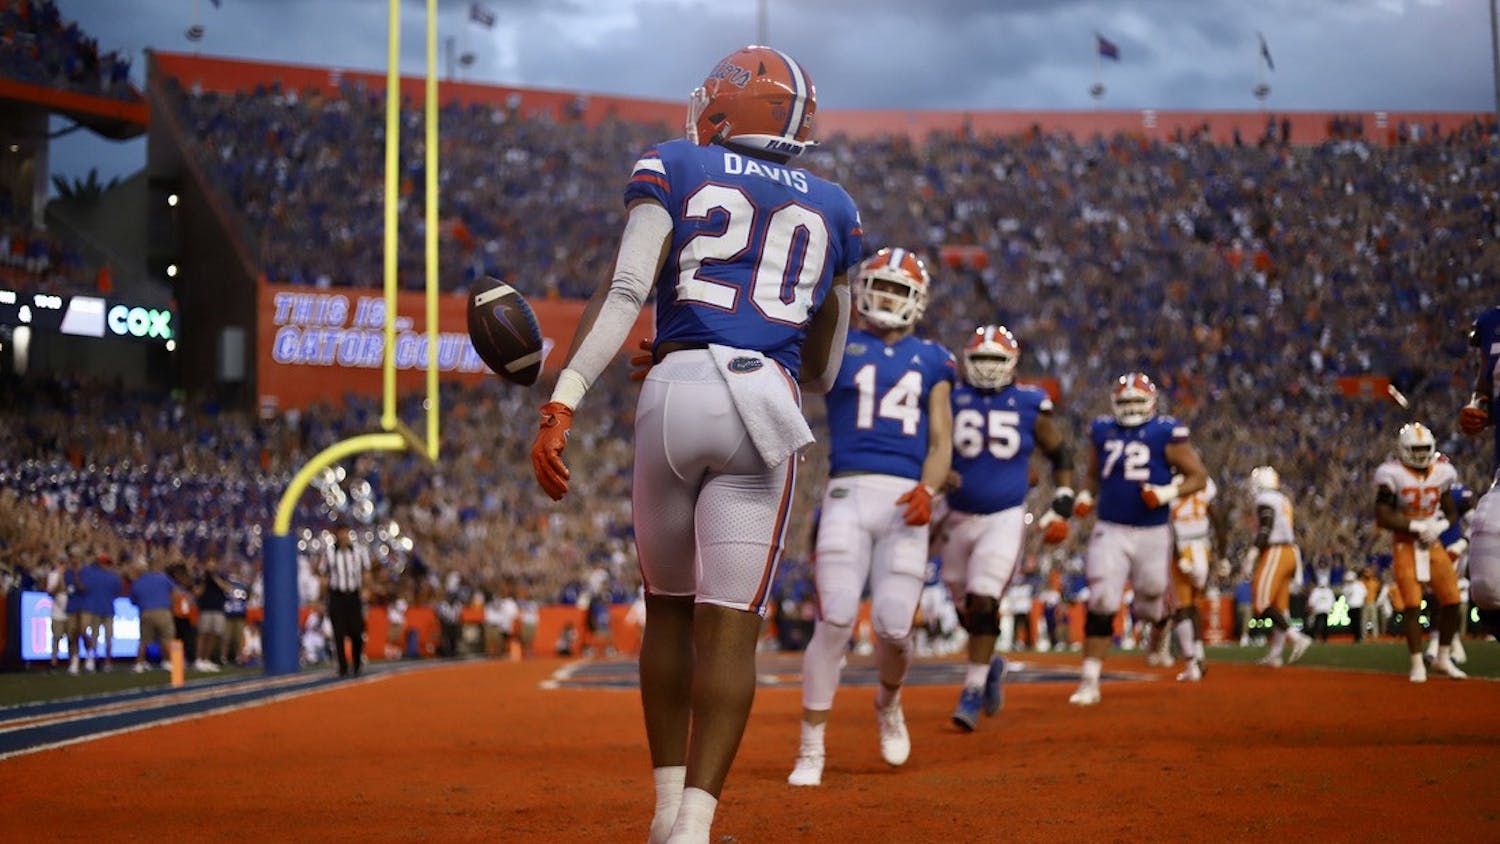 Florida's Malik Davis (20) celebrates an early touchdown against Tennessee on Sept. 25.